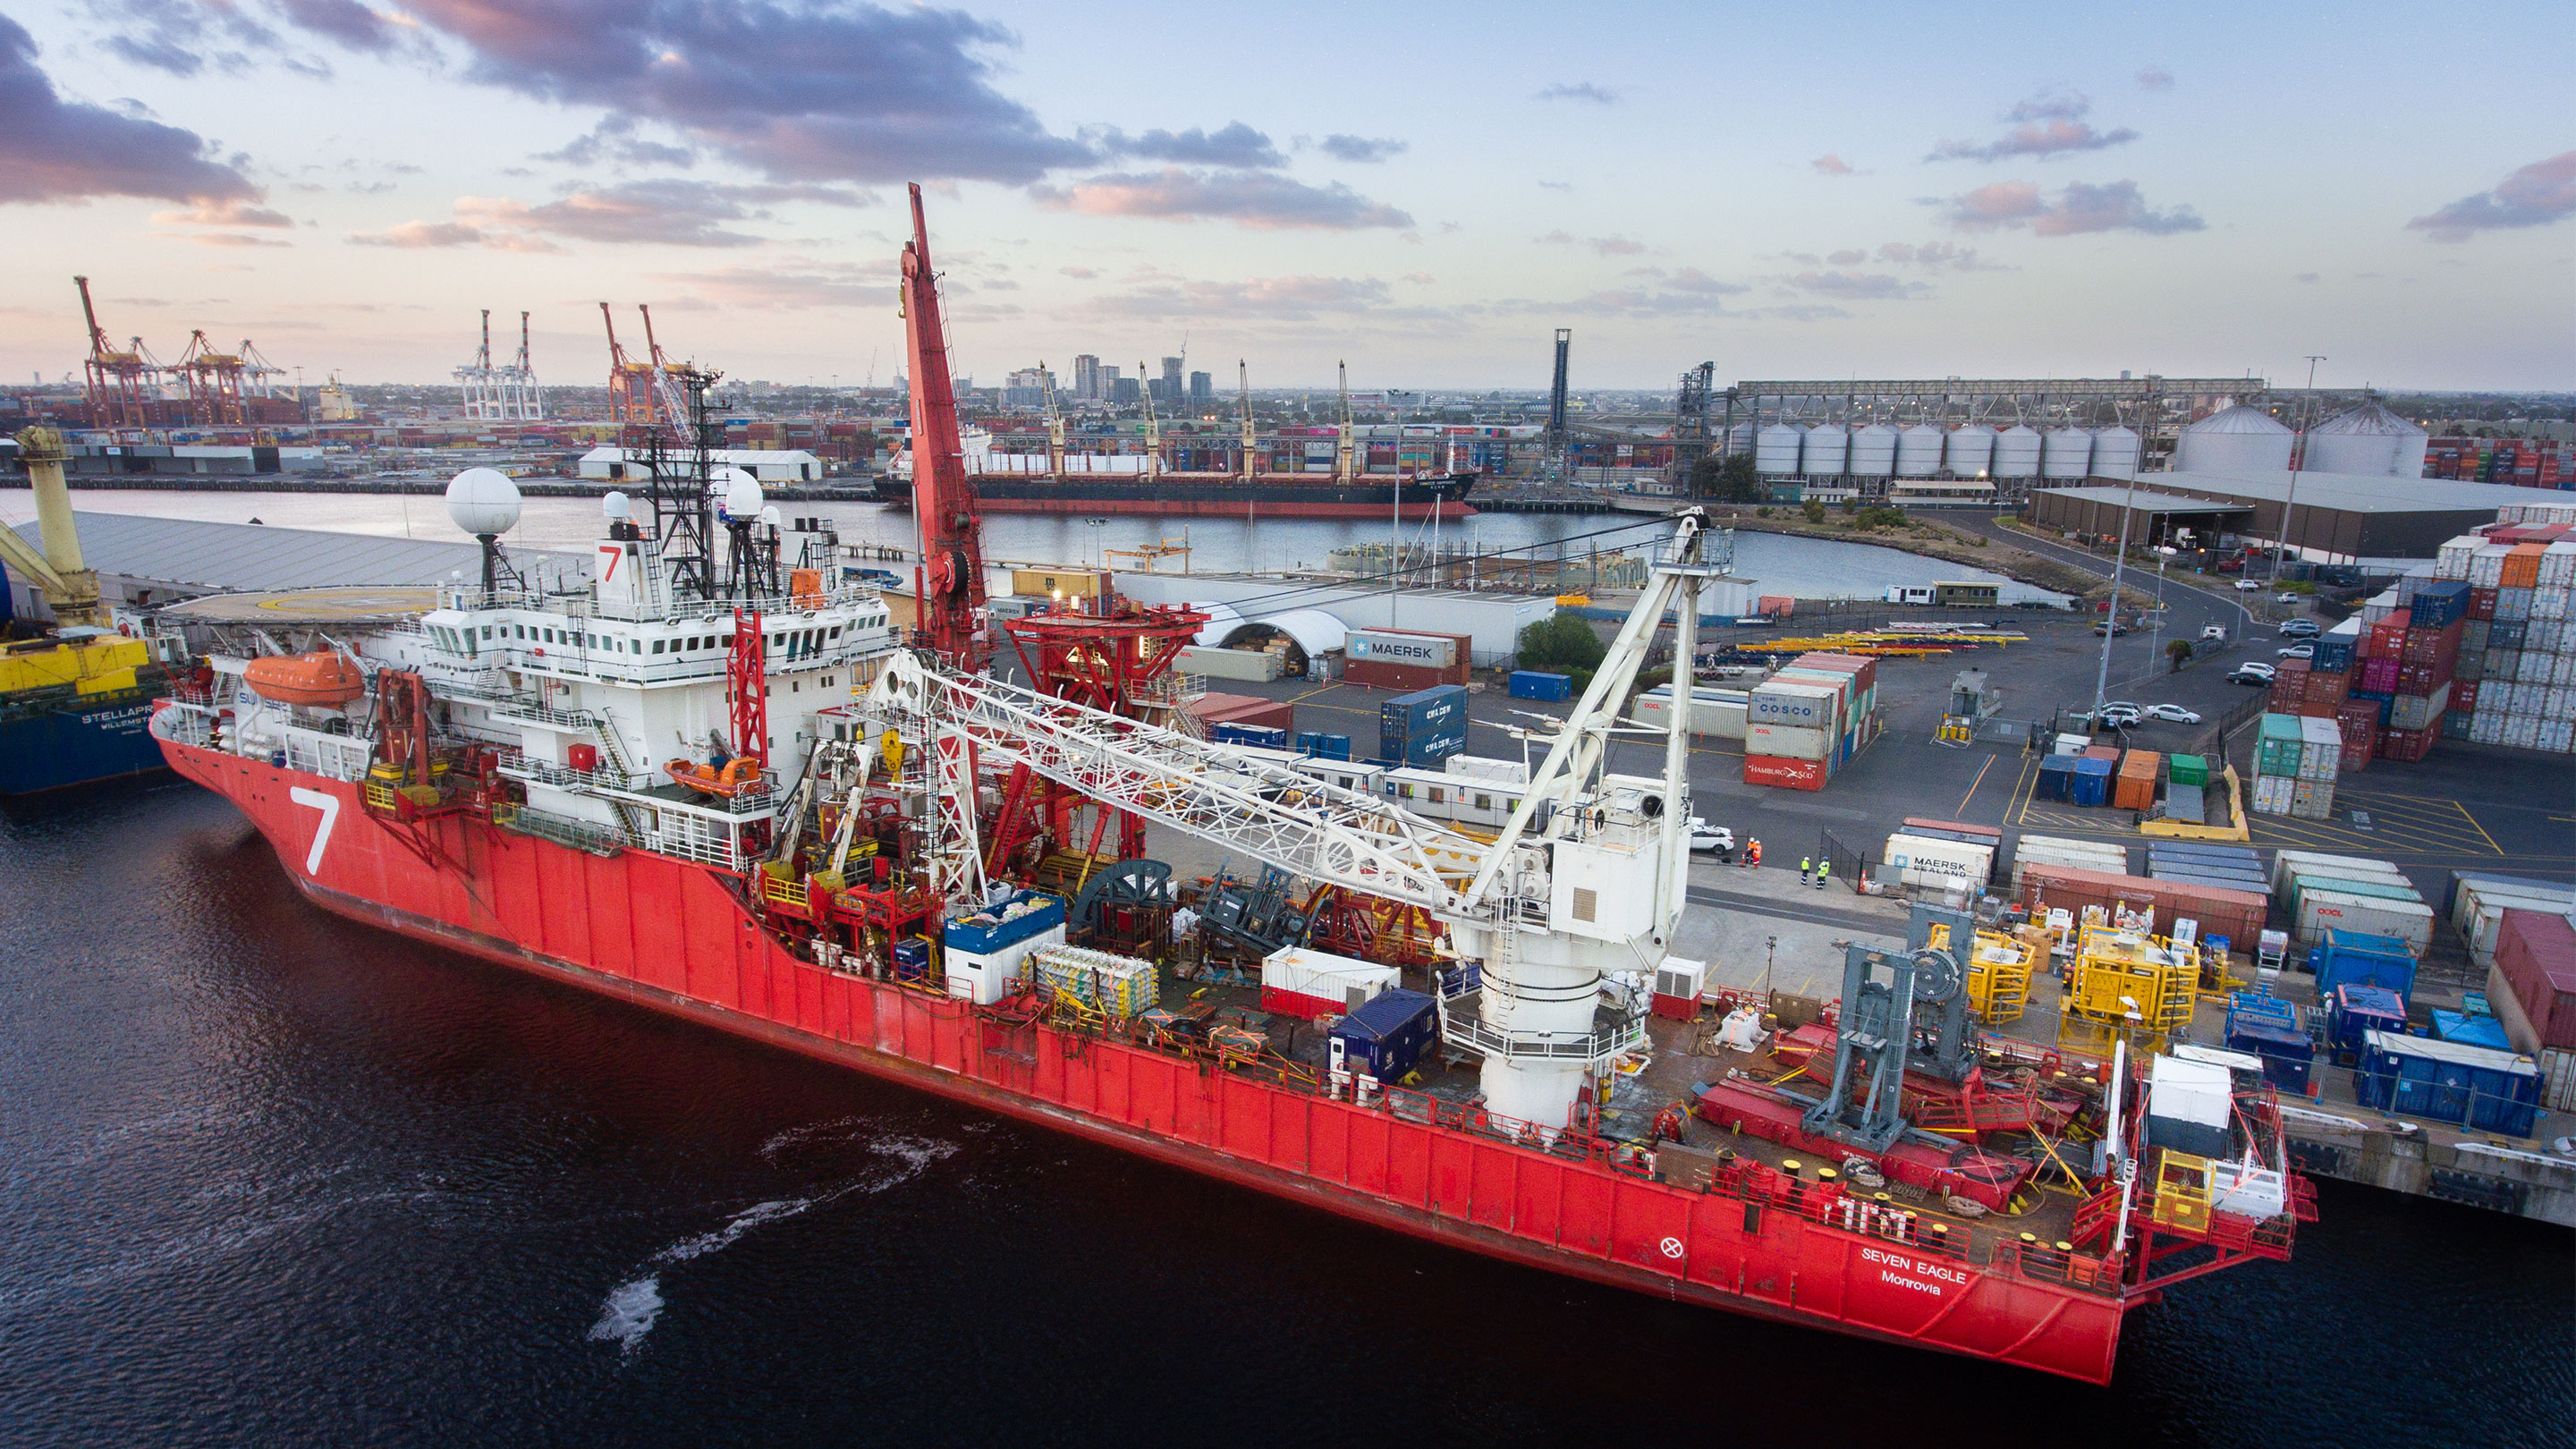 The Subsea 7 Seven Eagle in the Port of Melbourne